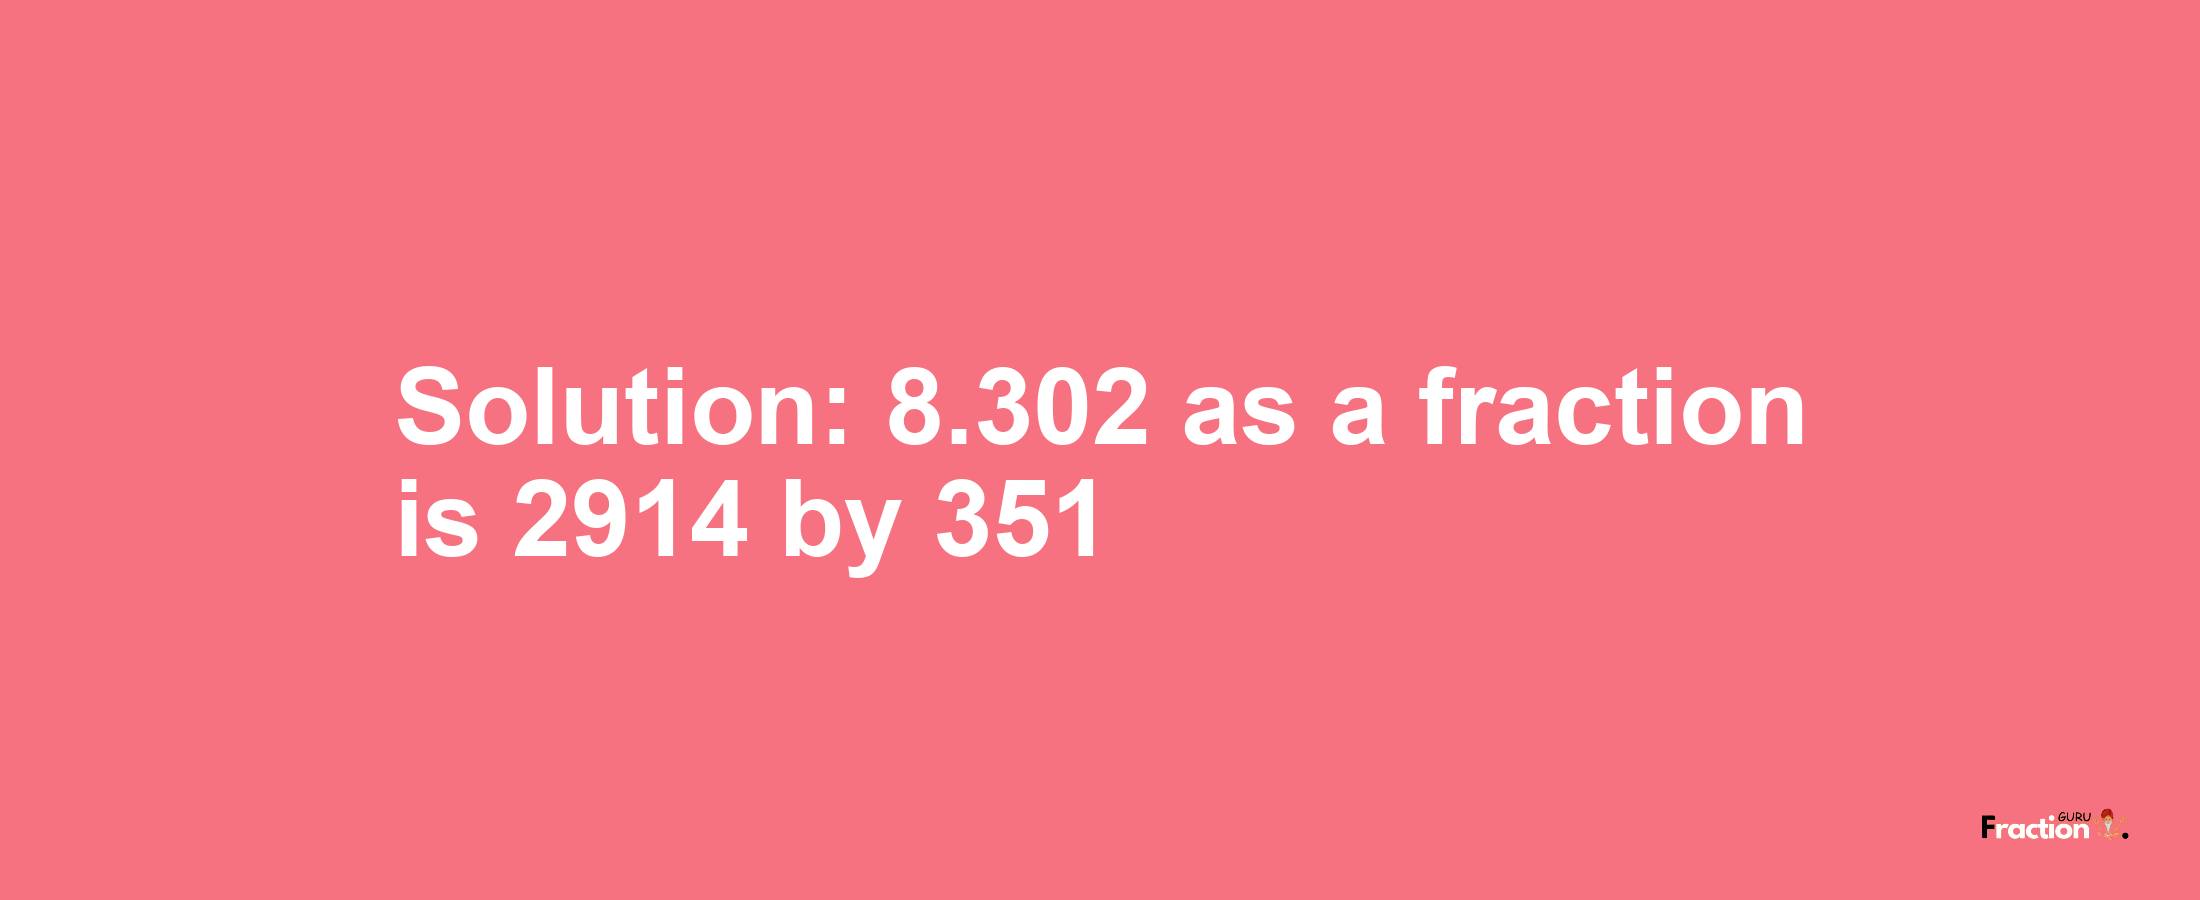 Solution:8.302 as a fraction is 2914/351